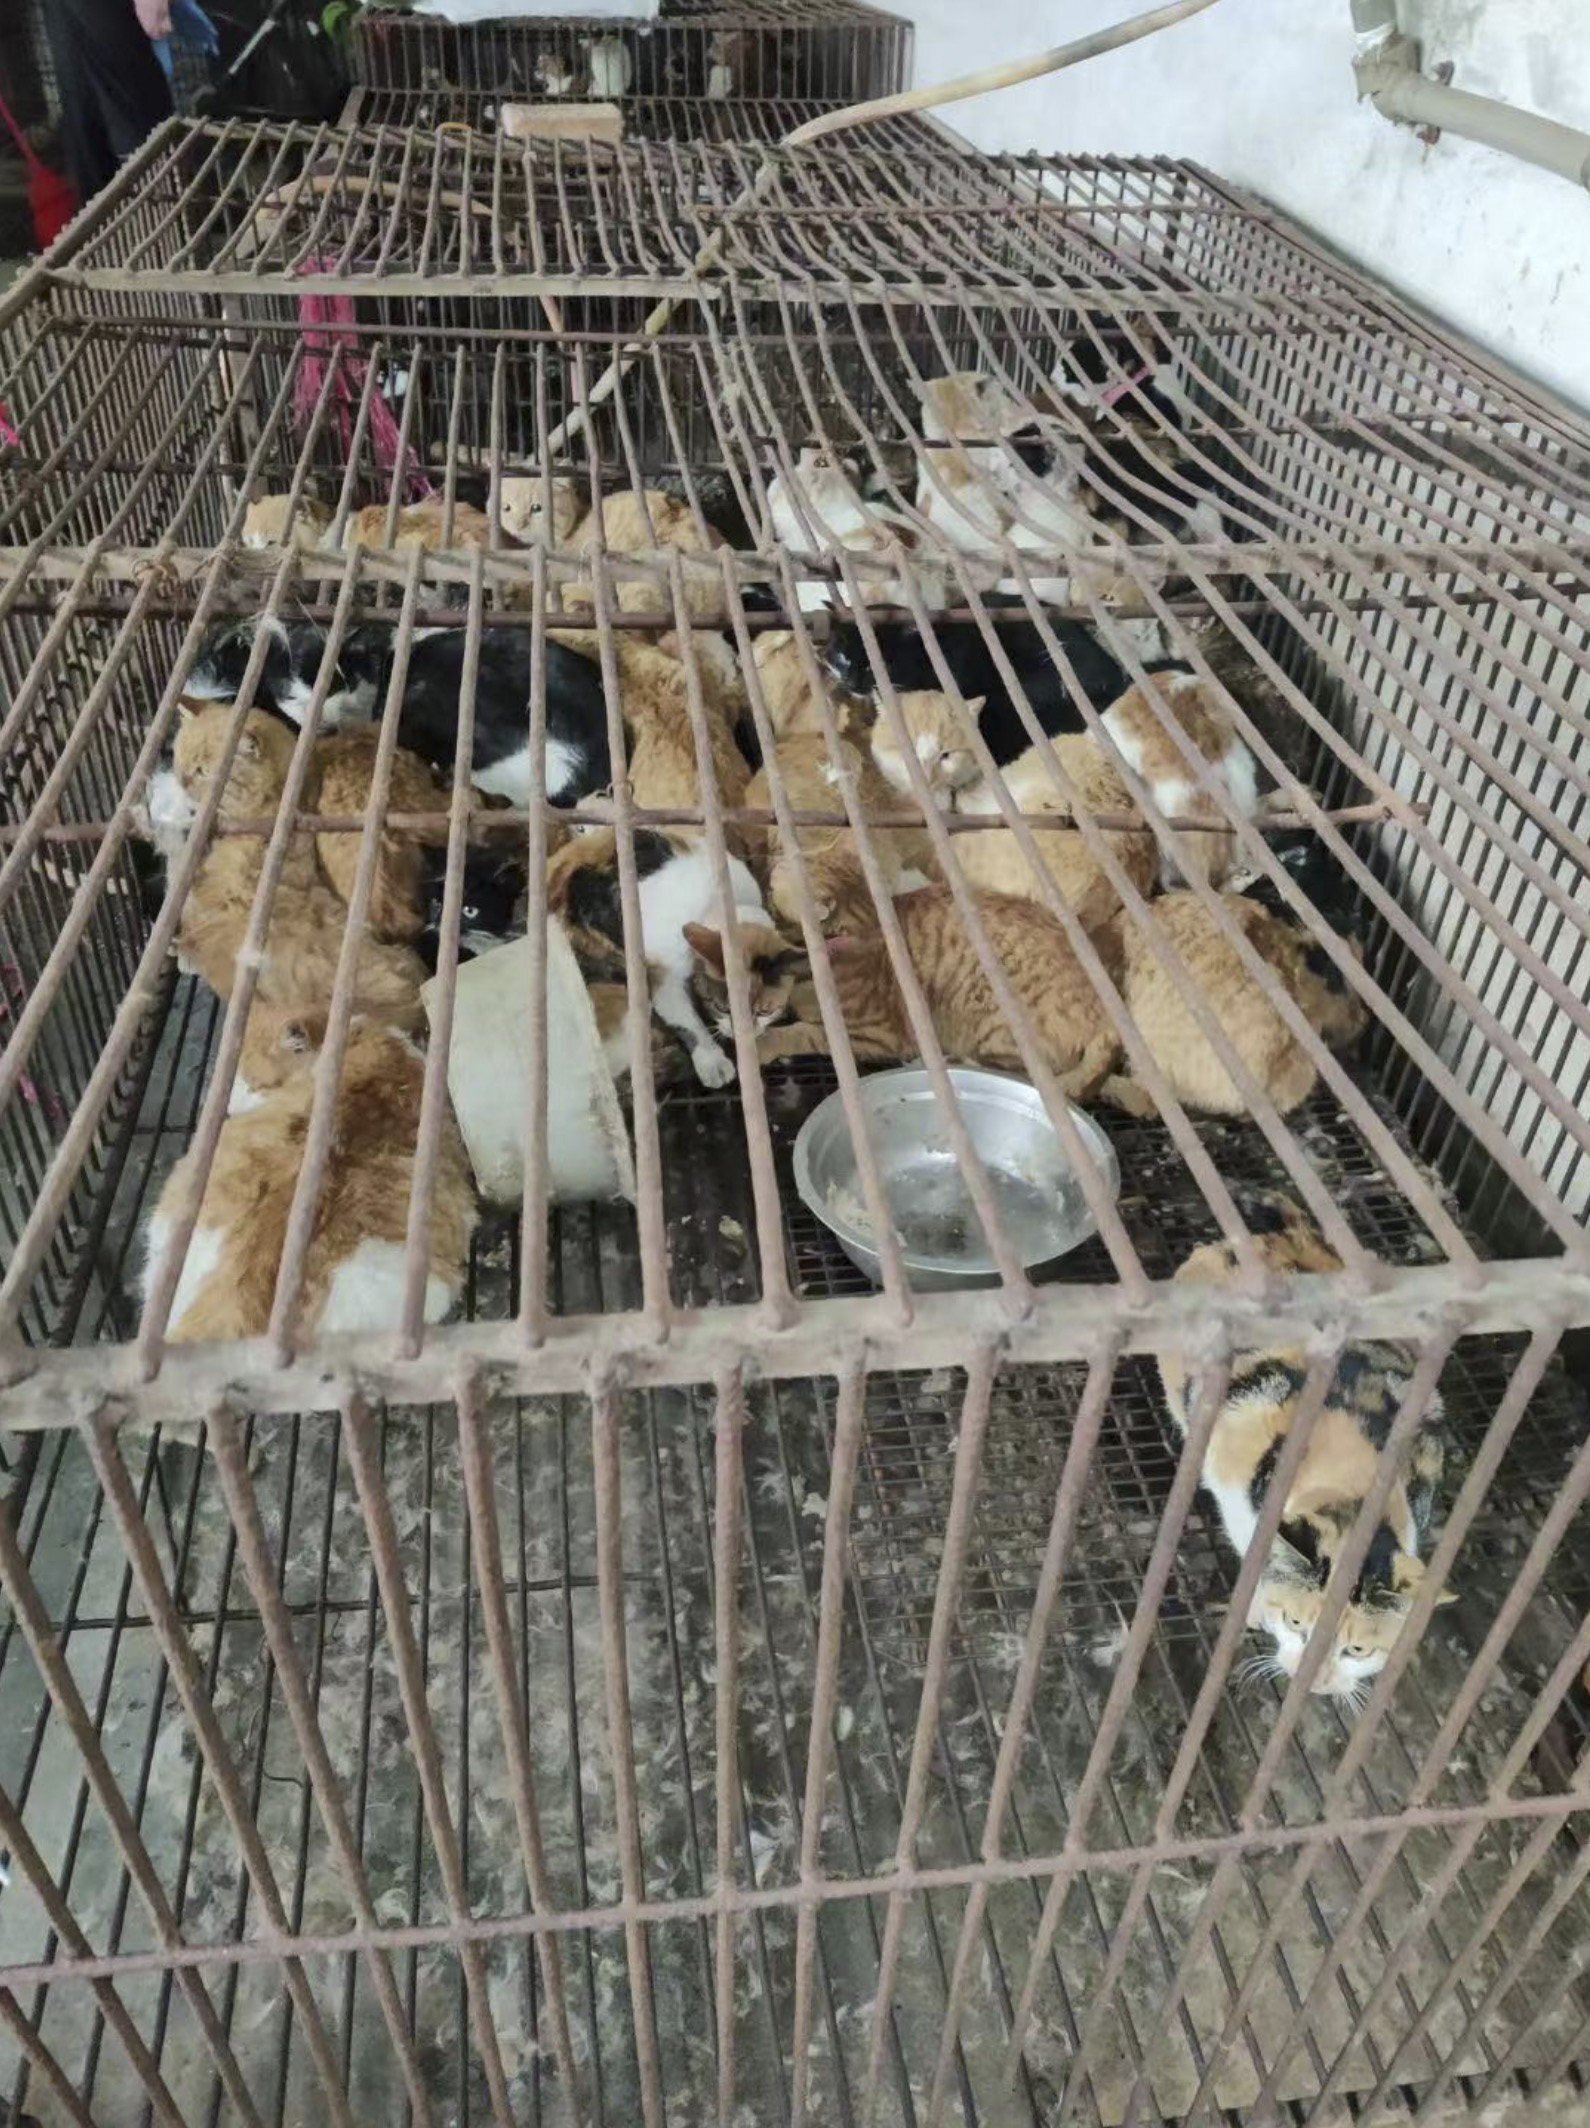 Authorities found hundreds of animals in filthy conditions. Photo: Handout